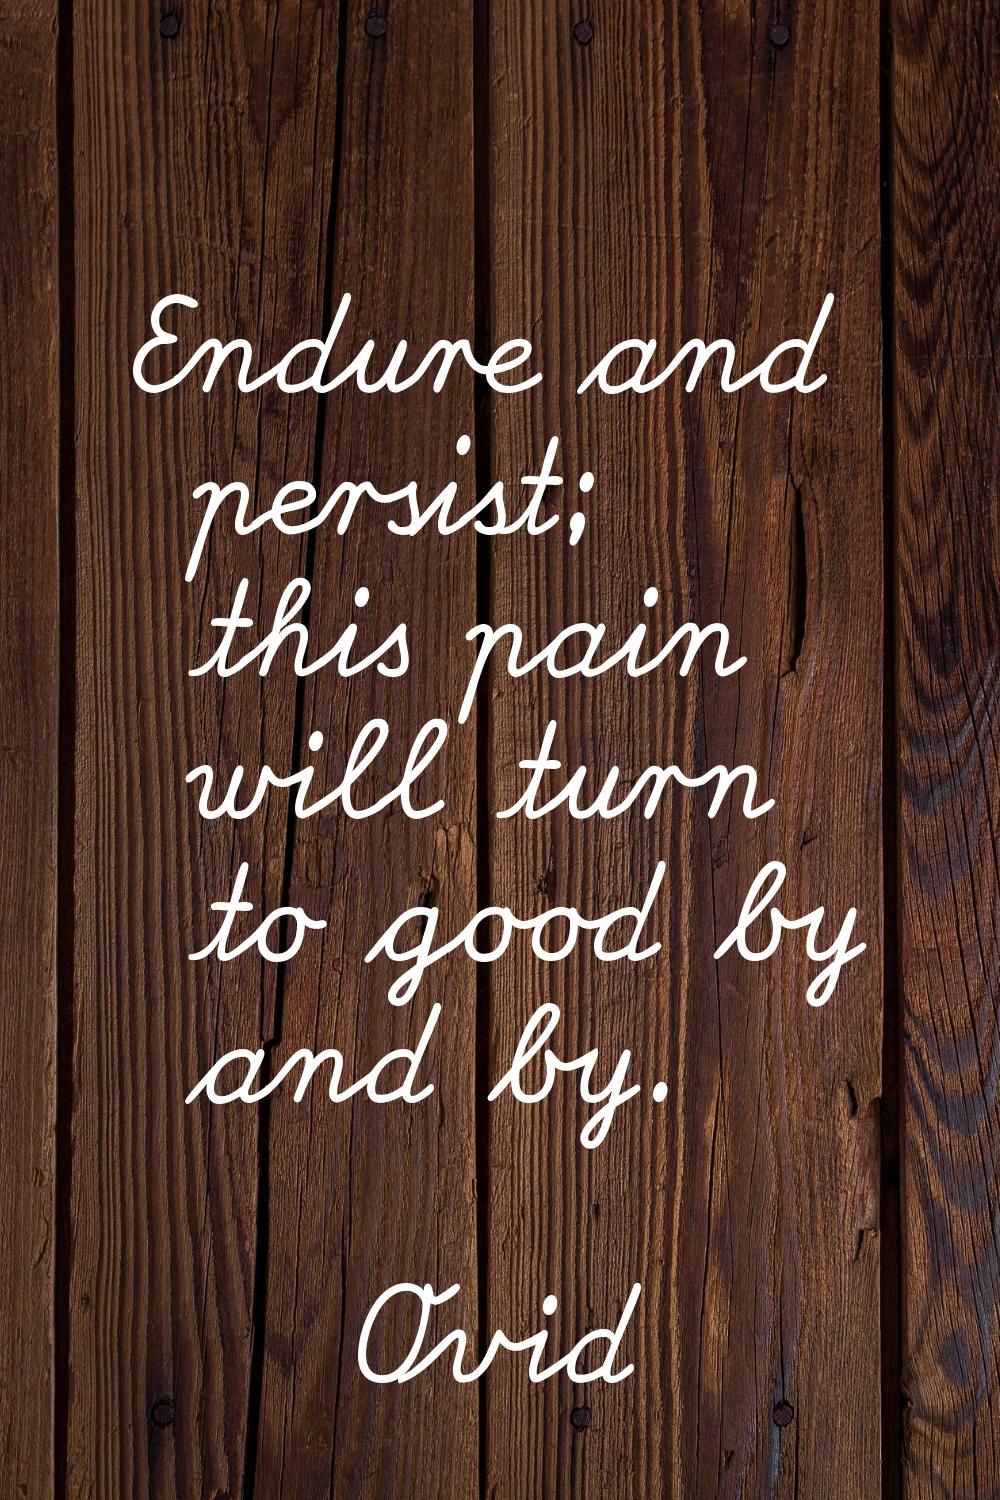 Endure and persist; this pain will turn to good by and by.